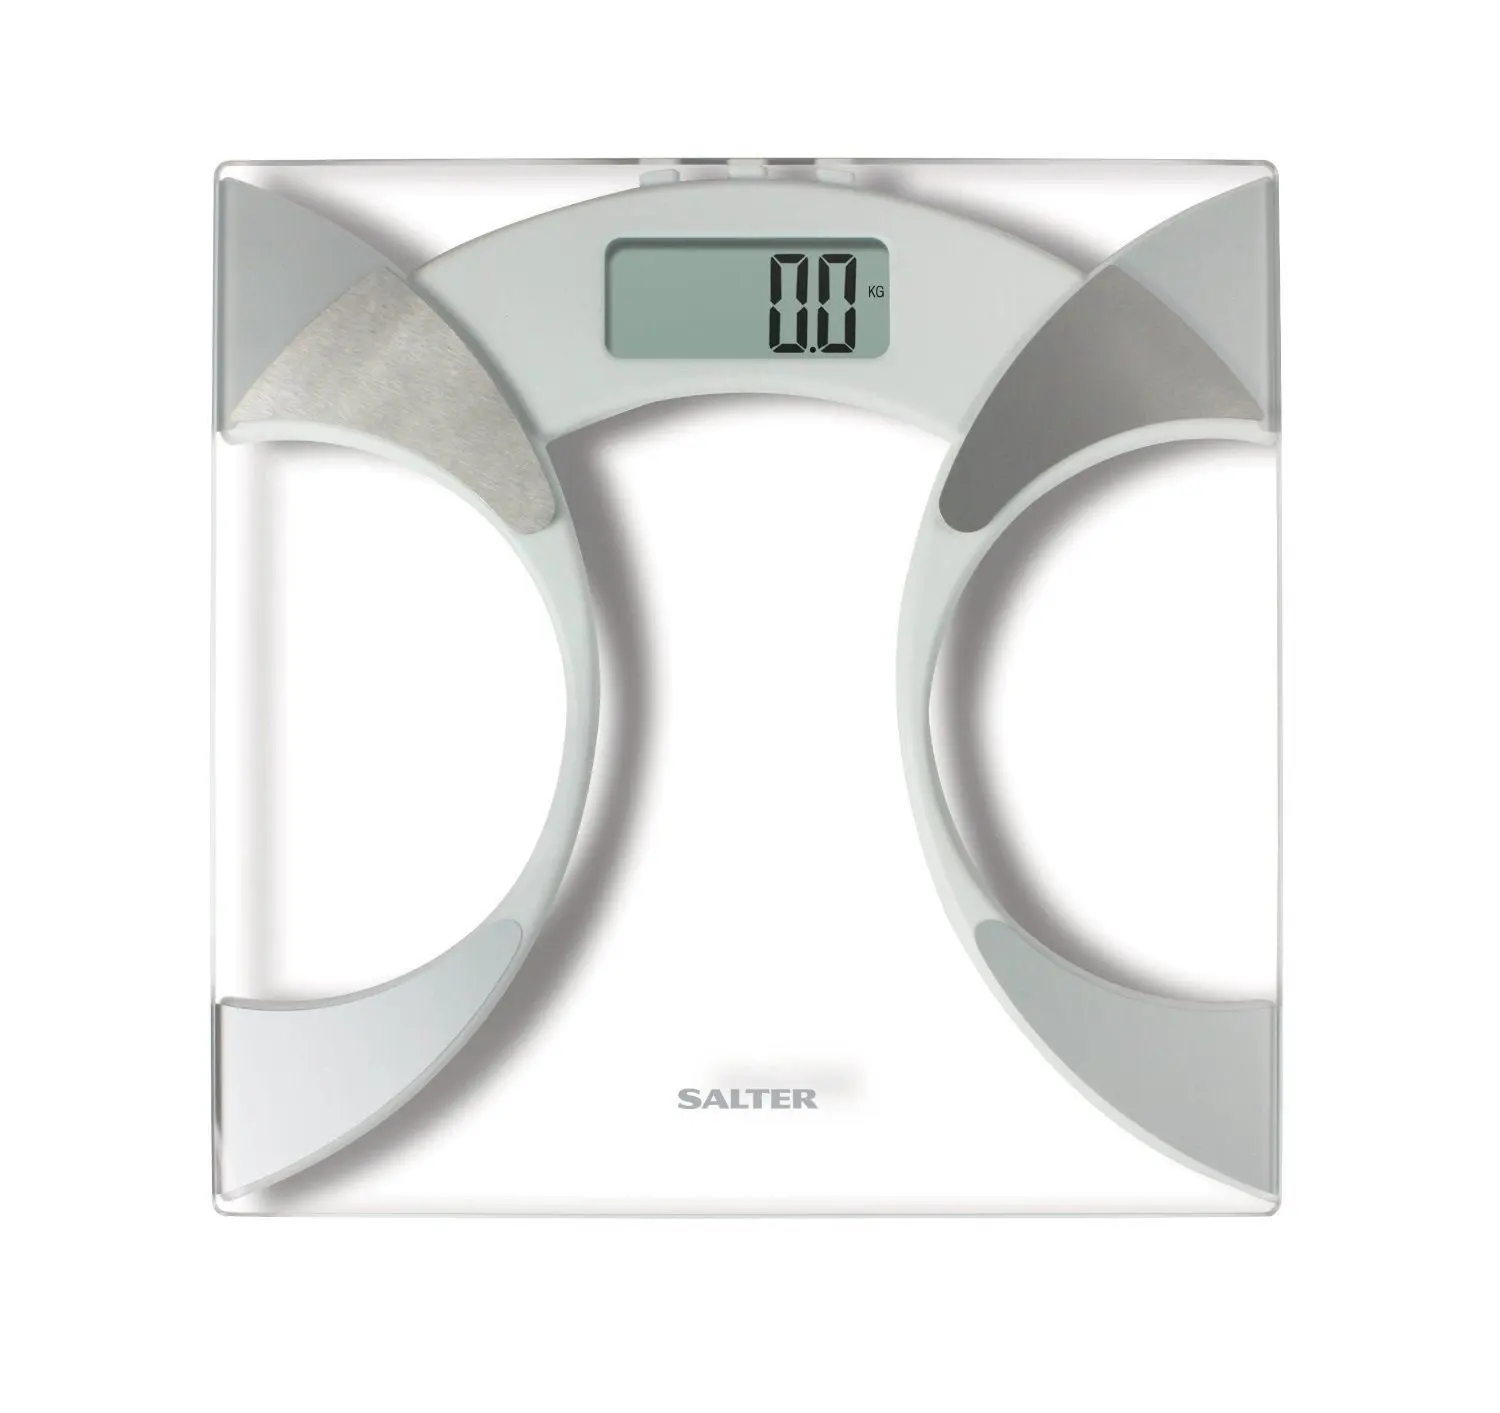 Cheap Salter Body Fat Scales Find Salter Body Fat Scales Deals On